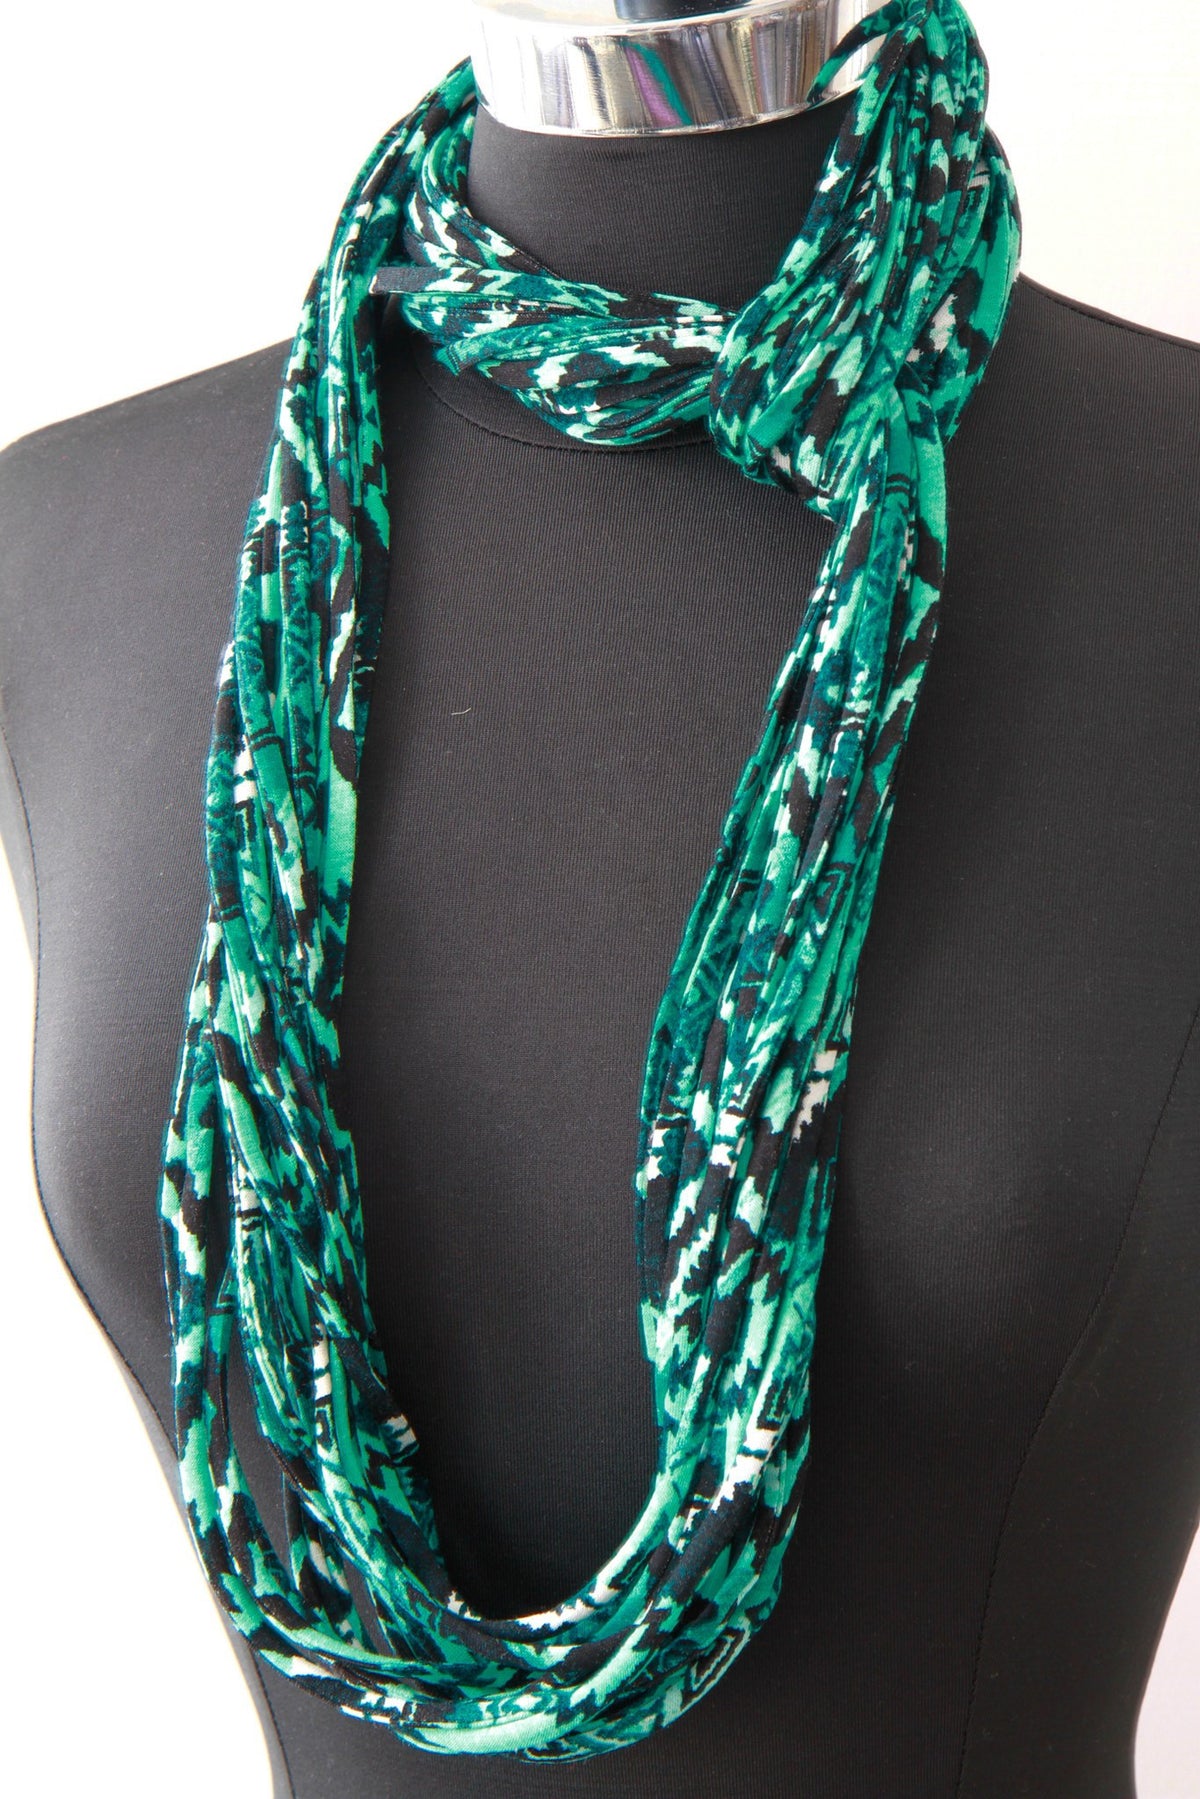 Infinity Scarf in Teal for Women